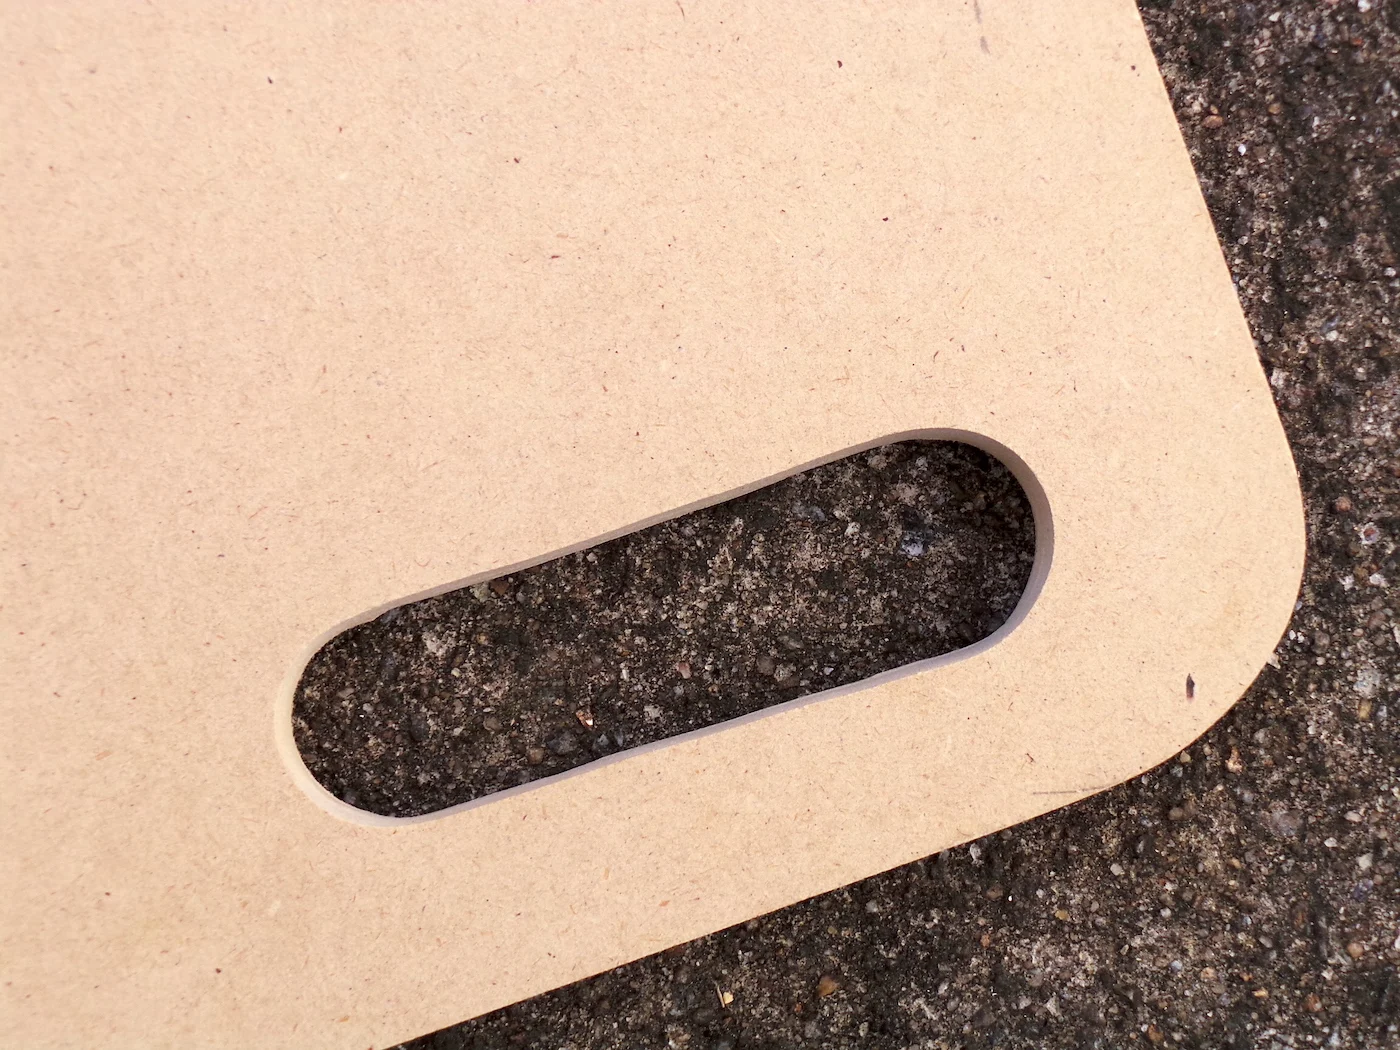 Handle cut out of MDF using a jig saw